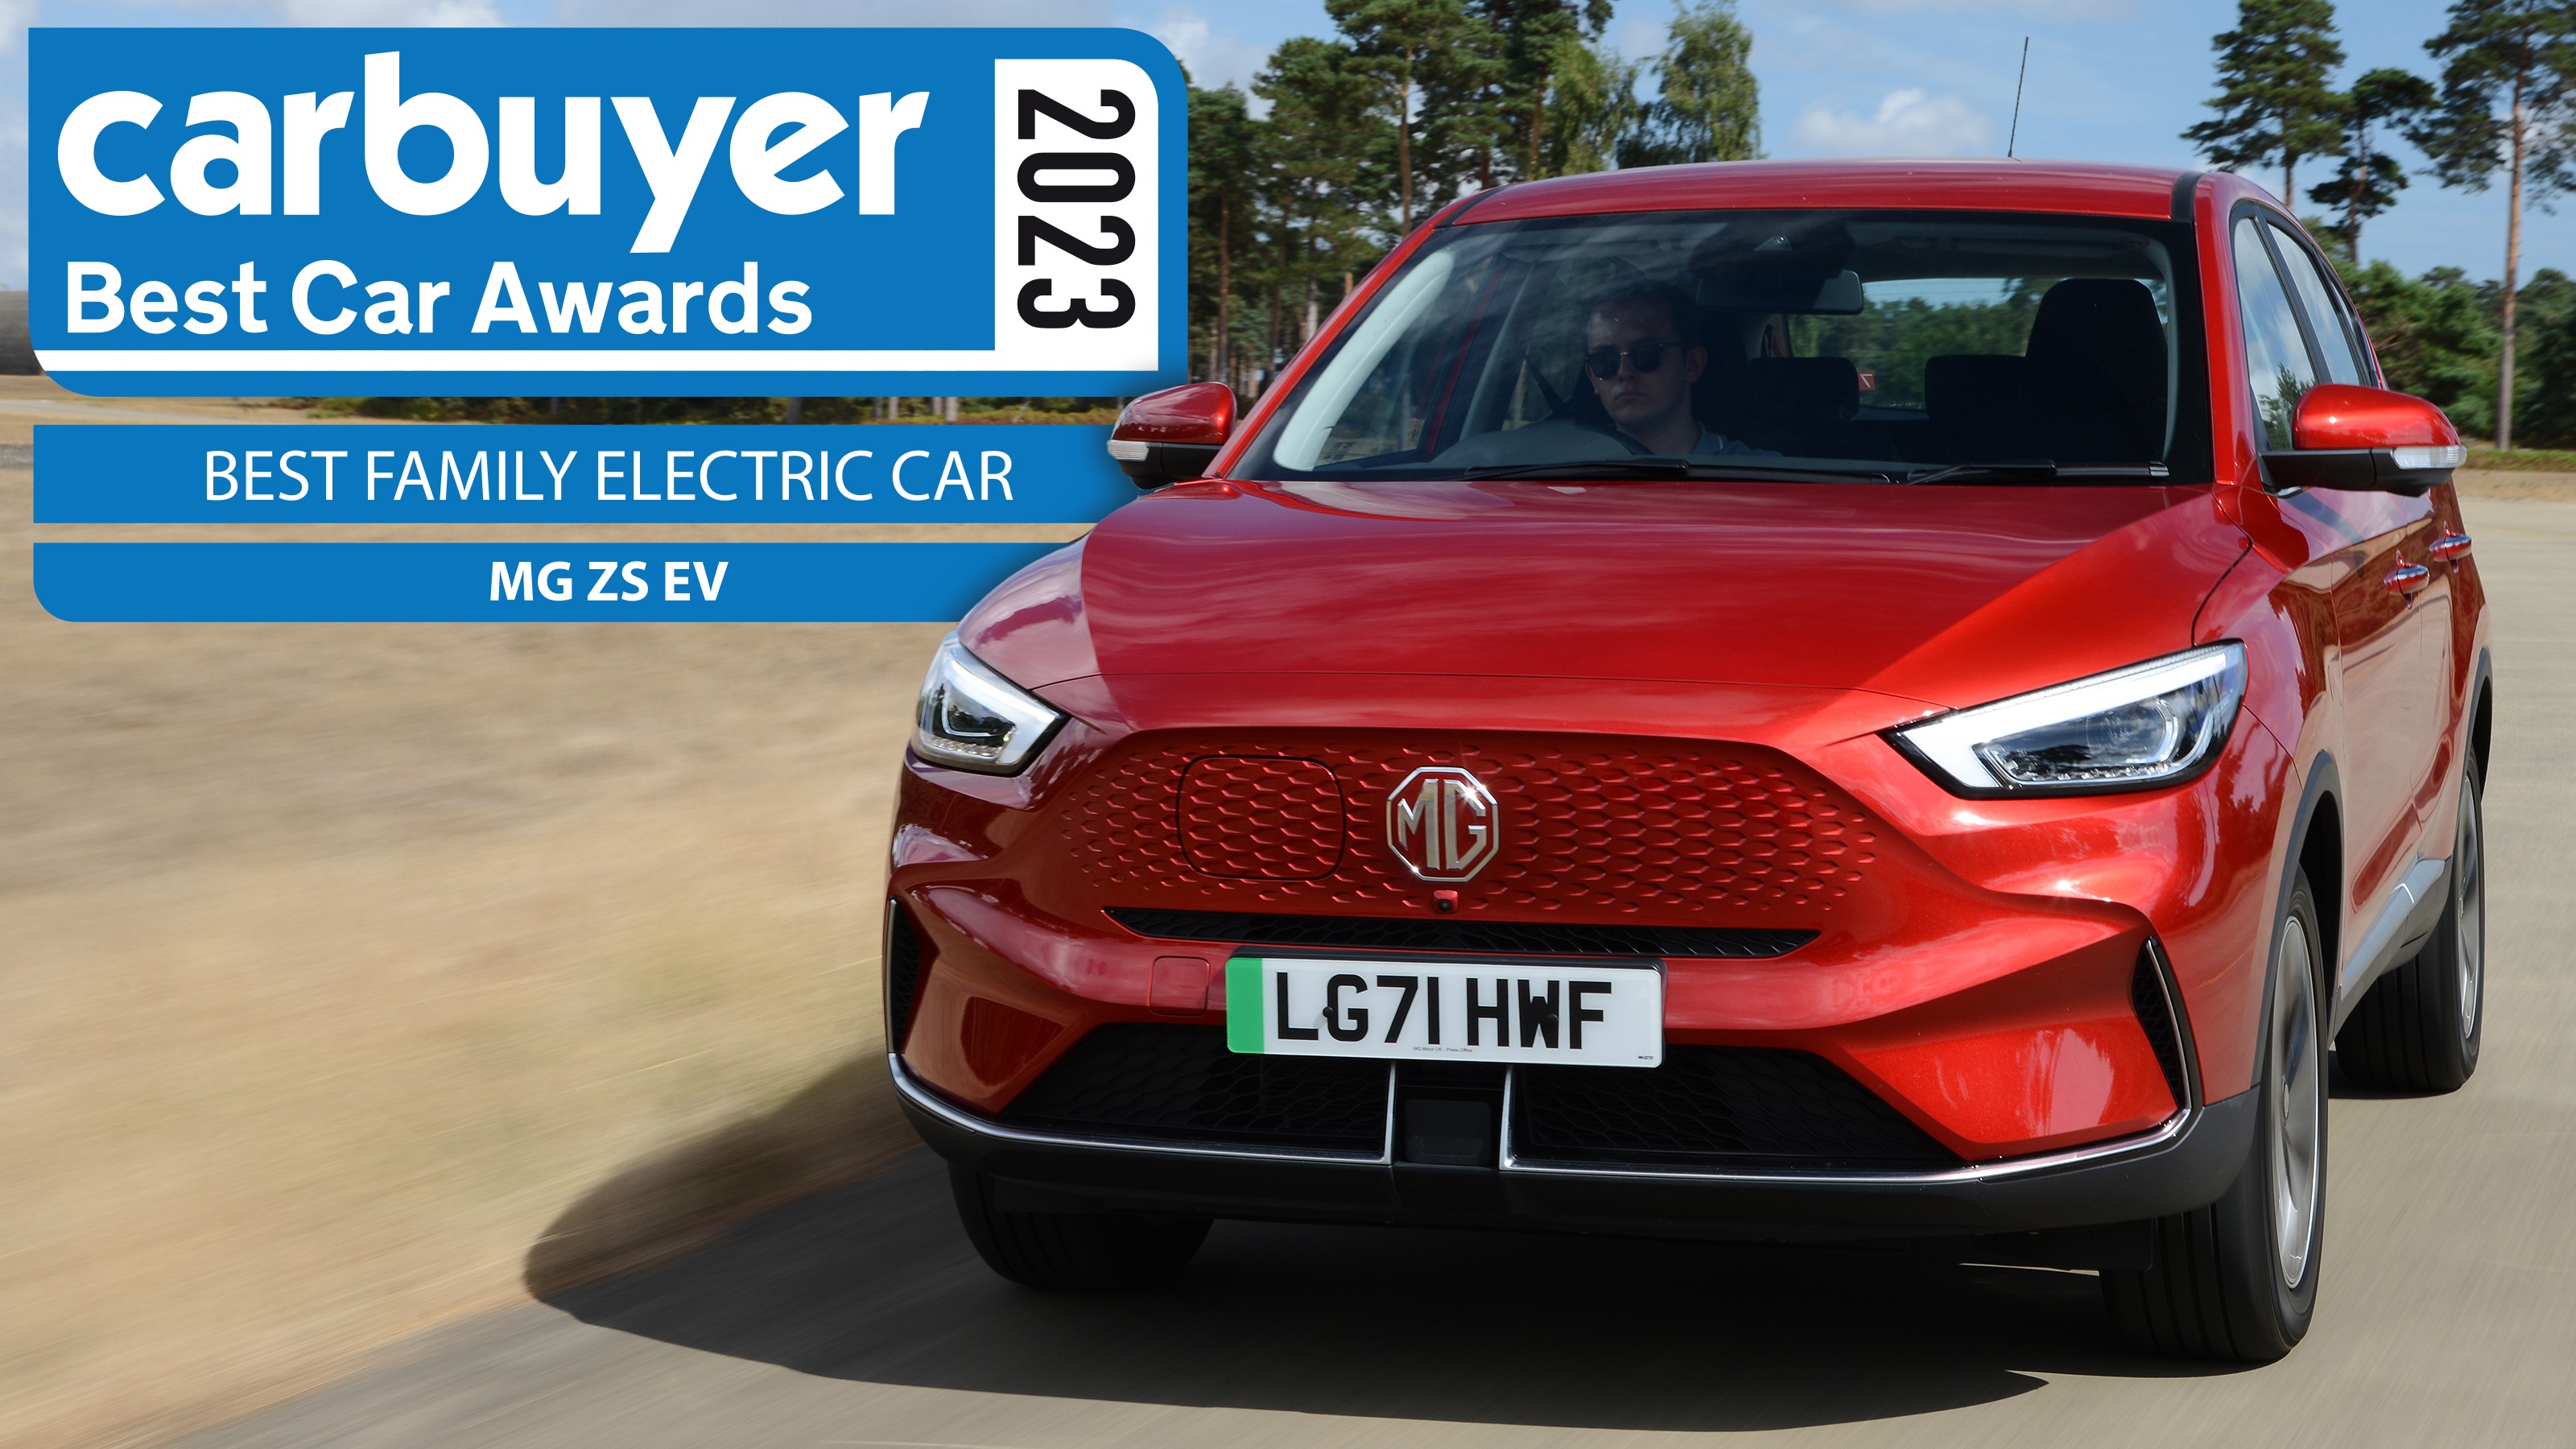 MG ZS EV named ‘Best Family Electric Car’ at 2023 Carbuyer Awards